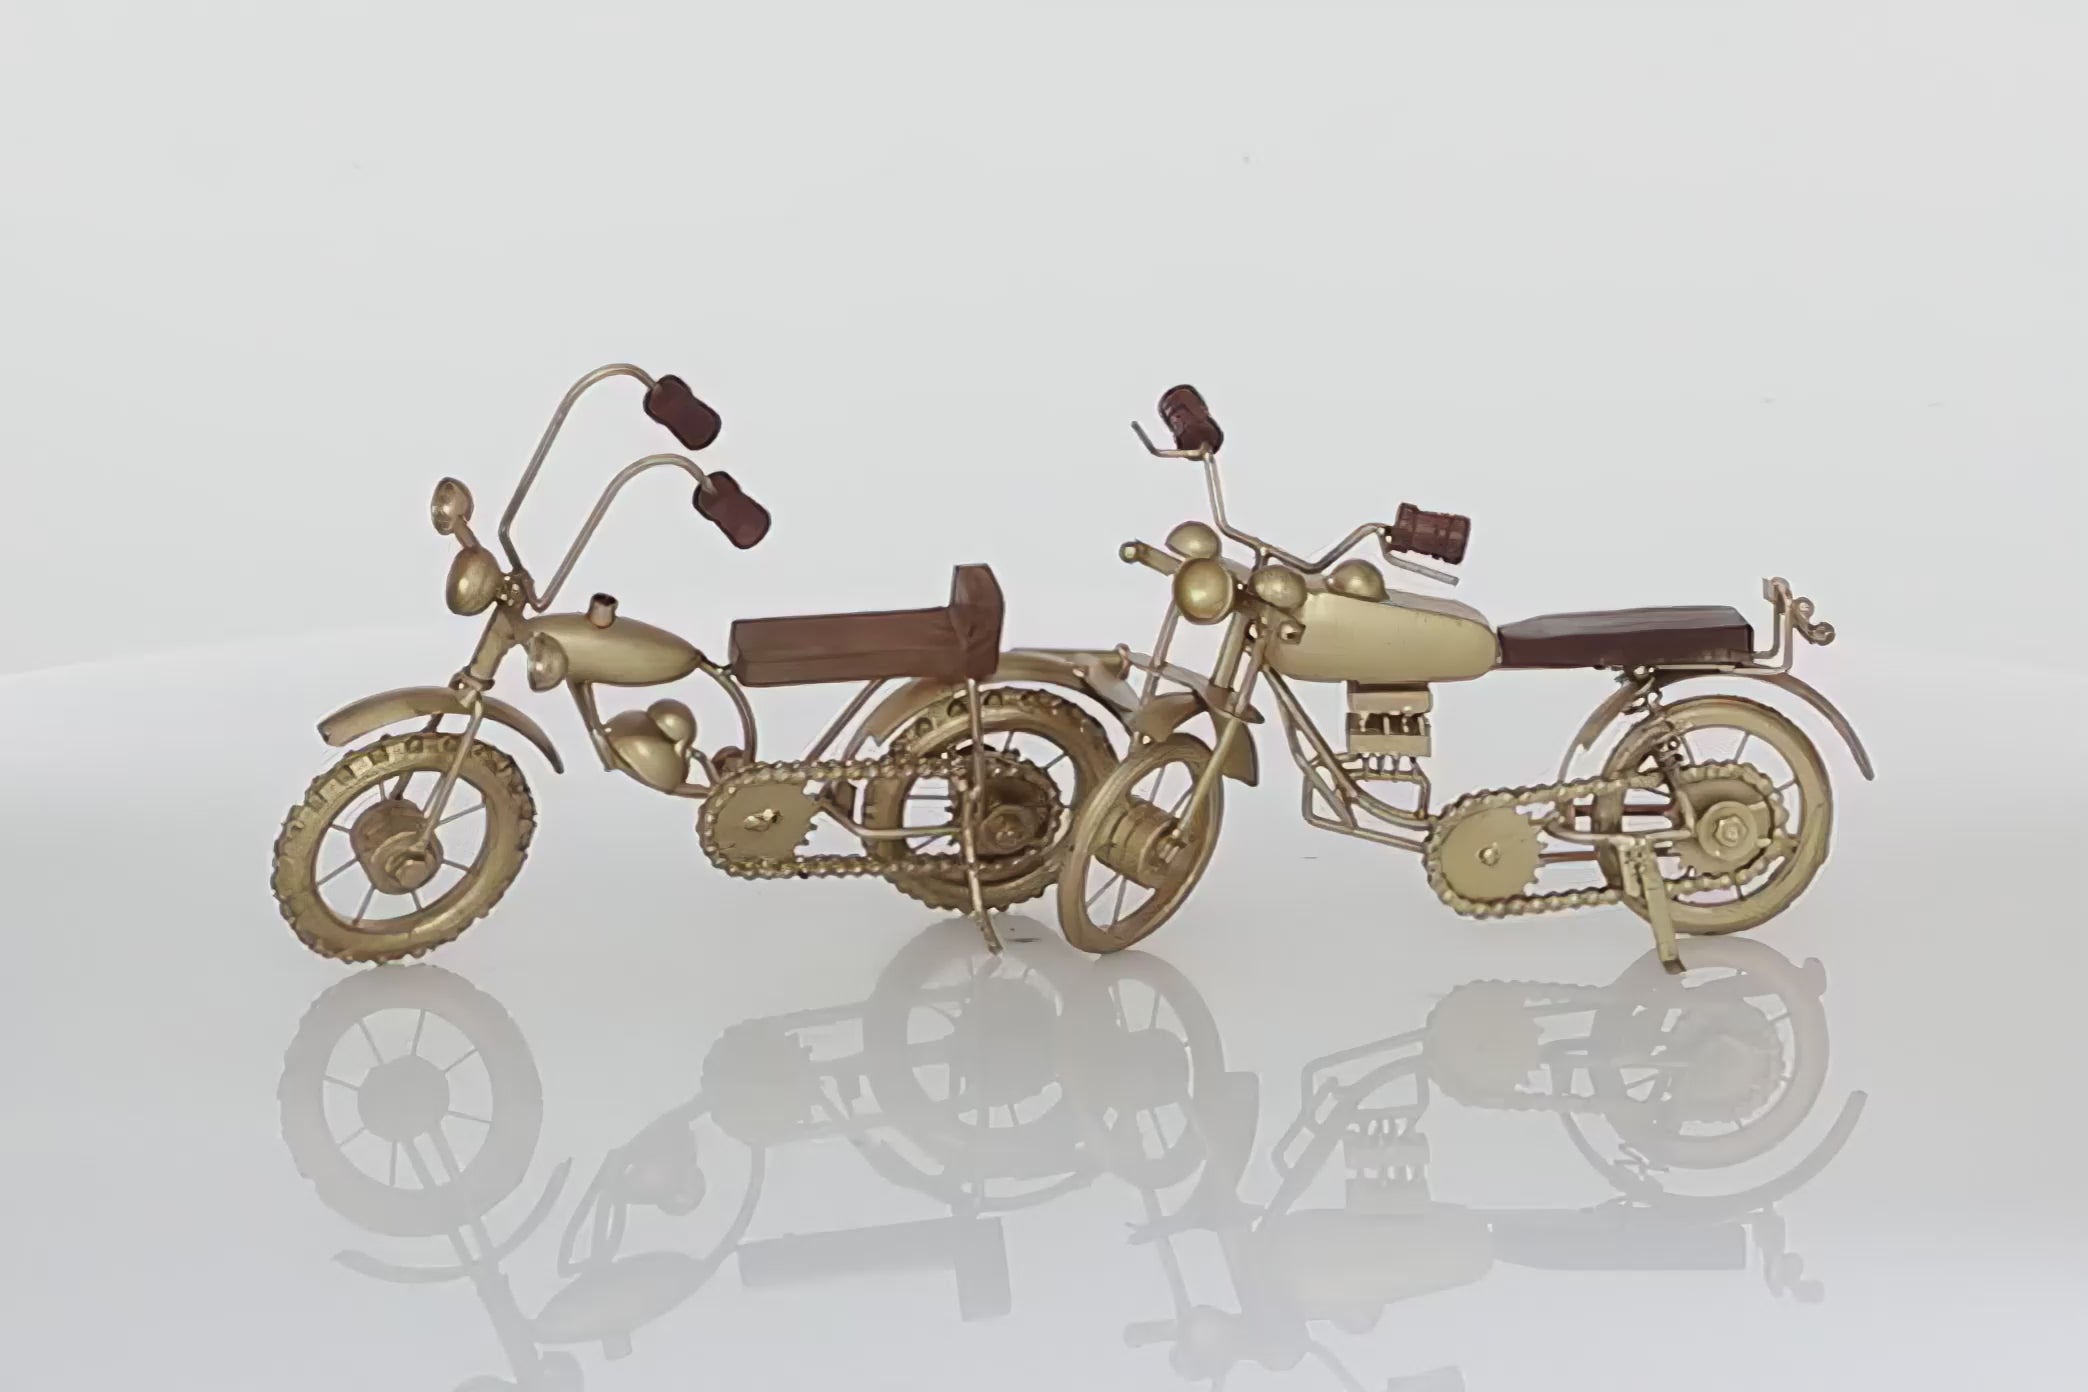 Set of two realistic motorcycles in gold color with wooden handles and seat. Motorcycles are spinning in 360 degrees and background is all white 